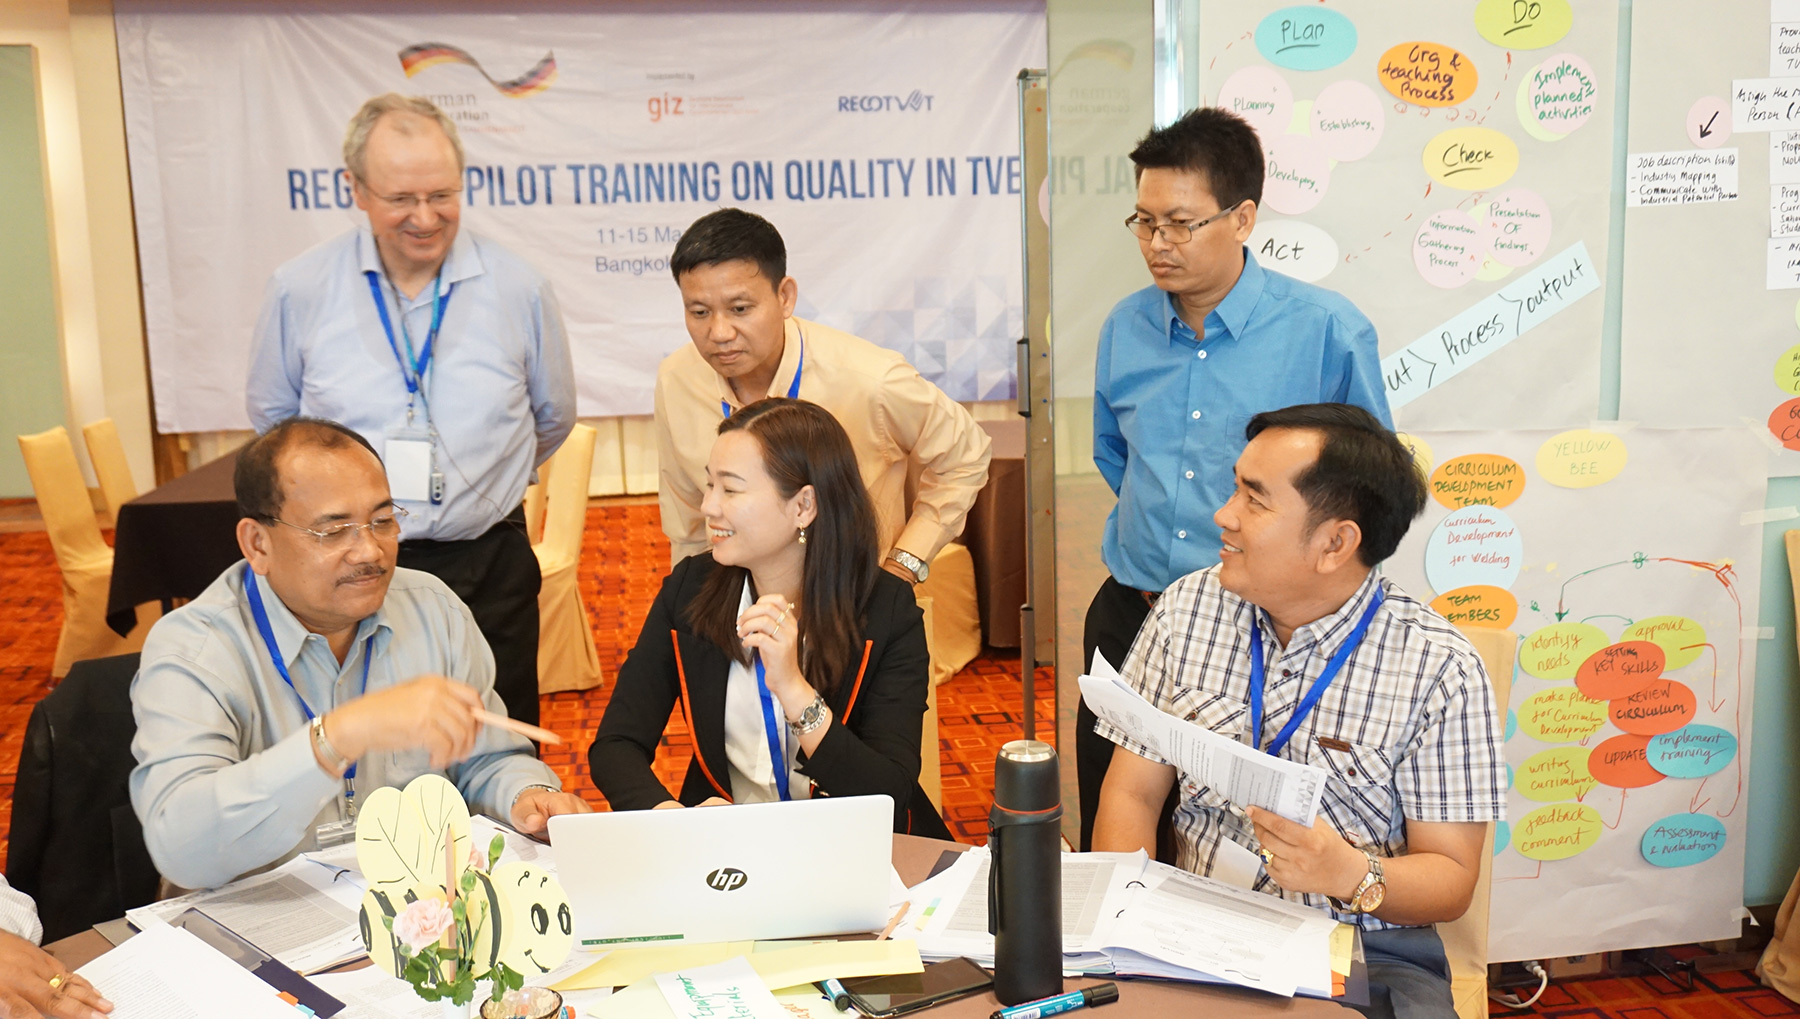 ASEAN Community of Practitioners upgrade skills of Technical and Vocational Education teachers to address Industry 4.0